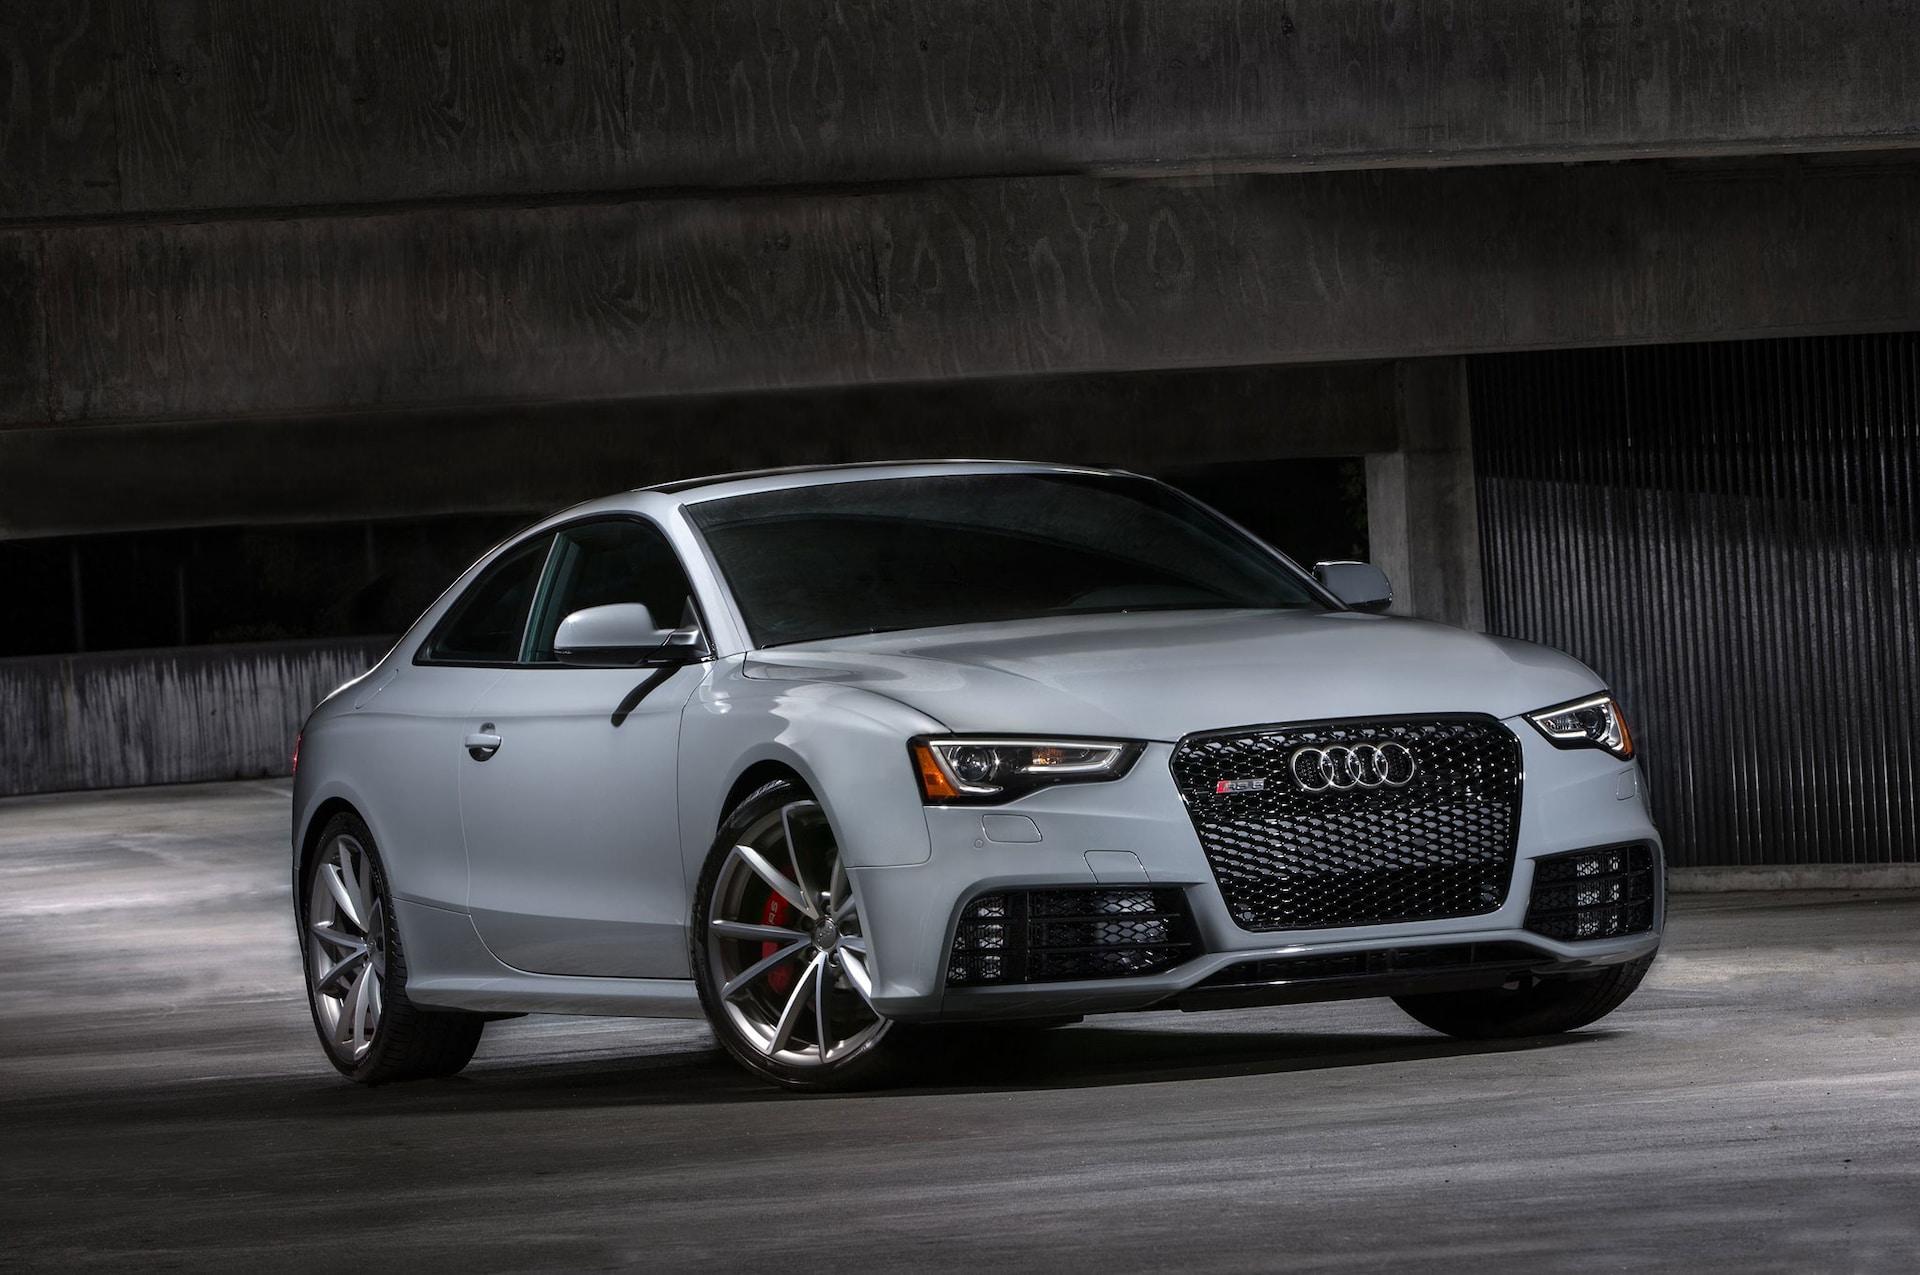 2015 Audi RS 5 Coupe Sport Edition Debuts, Limited to 75 Units